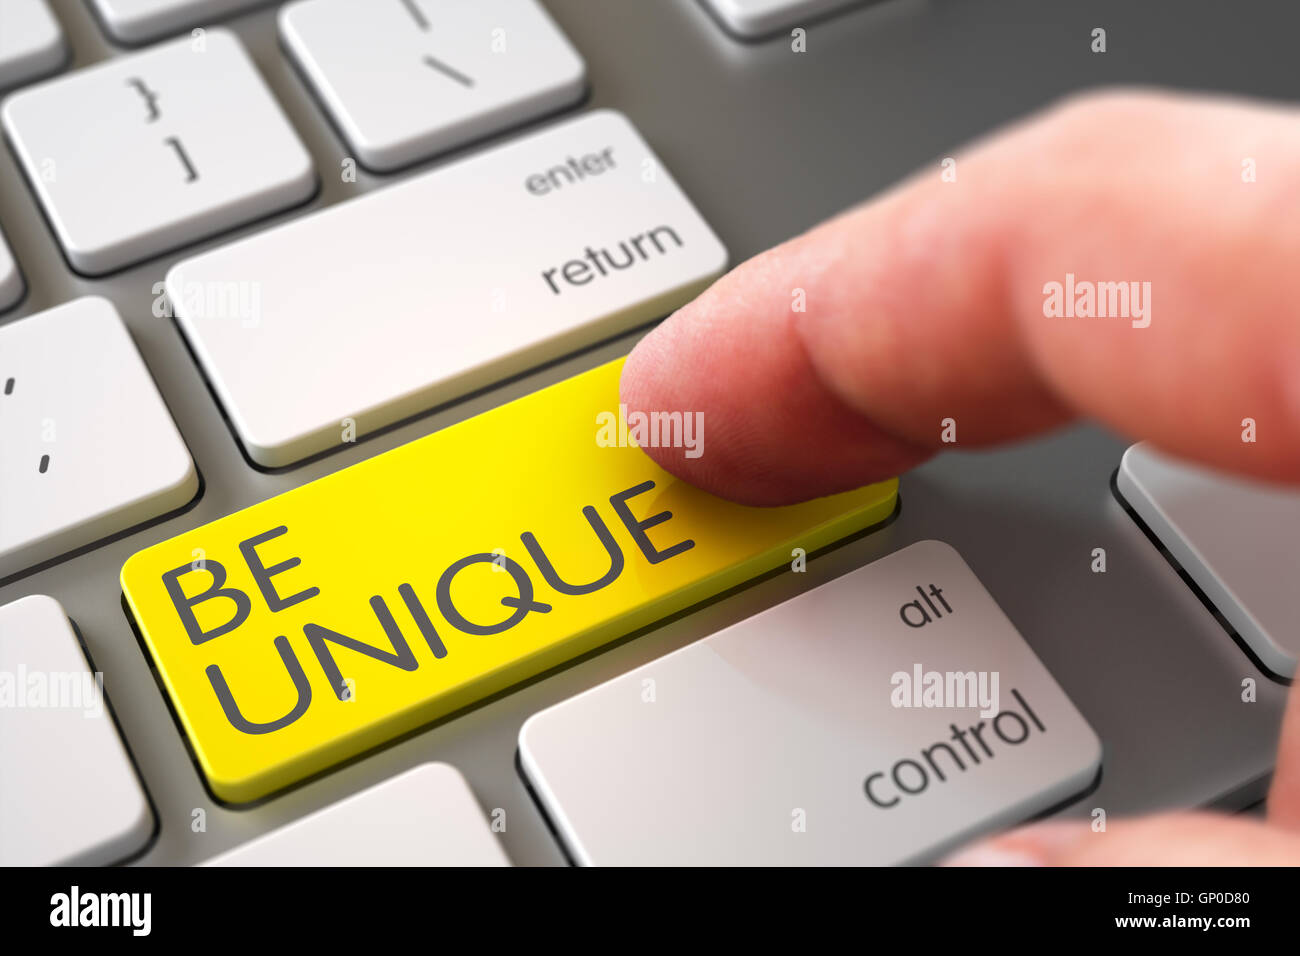 Finger Pushing Be Unique Yellow Button on Laptop Keyboard. 3D Illustration. Stock Photo